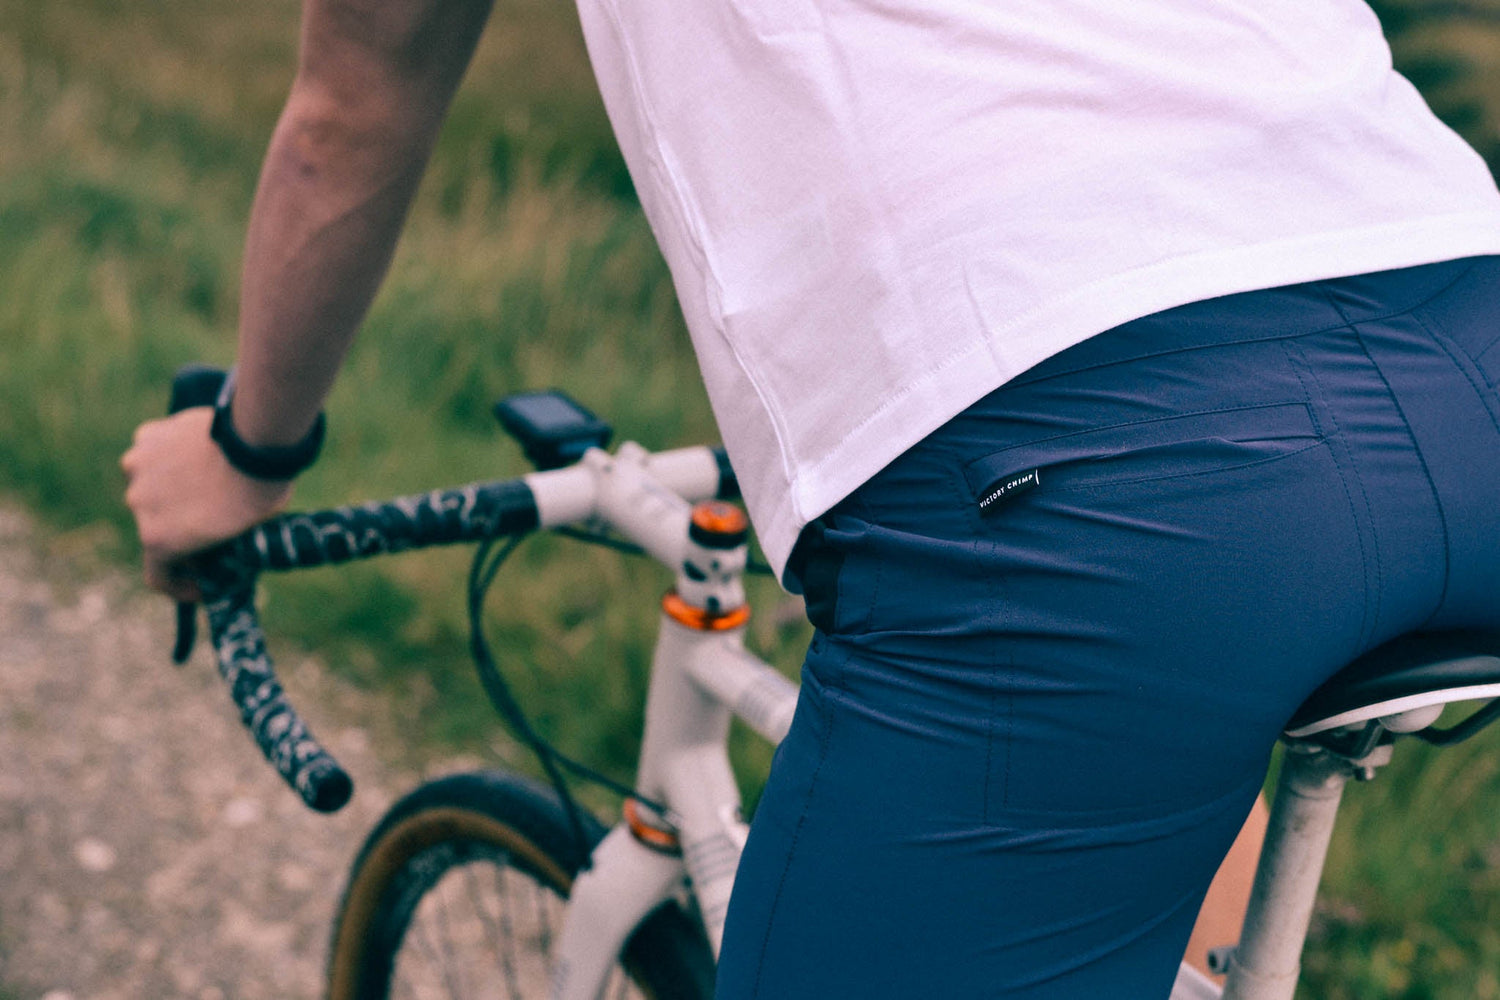 Out There Unisex Gravel Cycling Shorts (Navy)